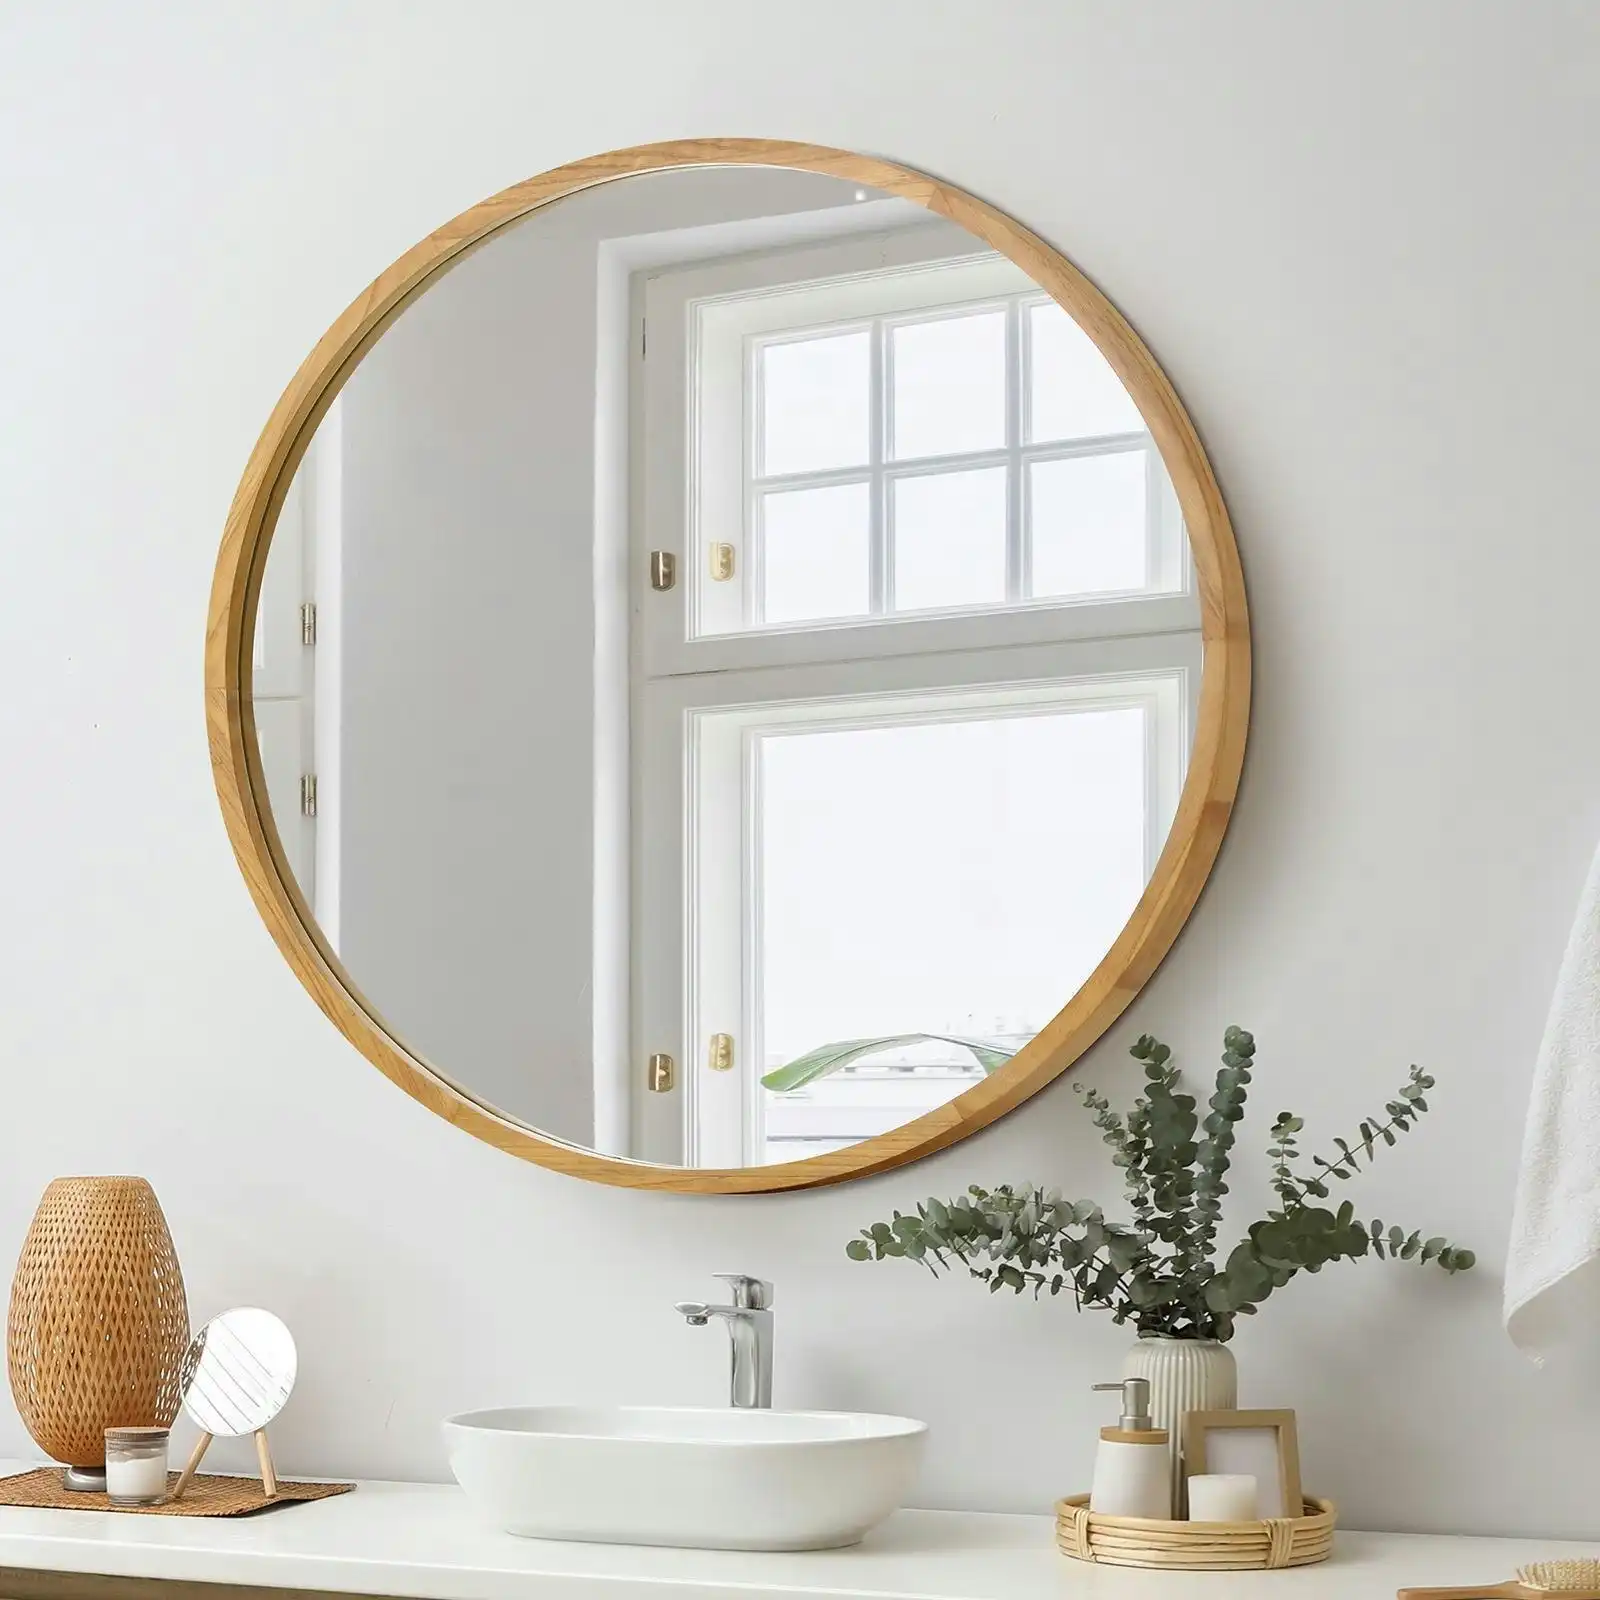 Oikiture Wall Mirrors Round Makeup Mirror Vanity Home Decorative Wooden 80cm